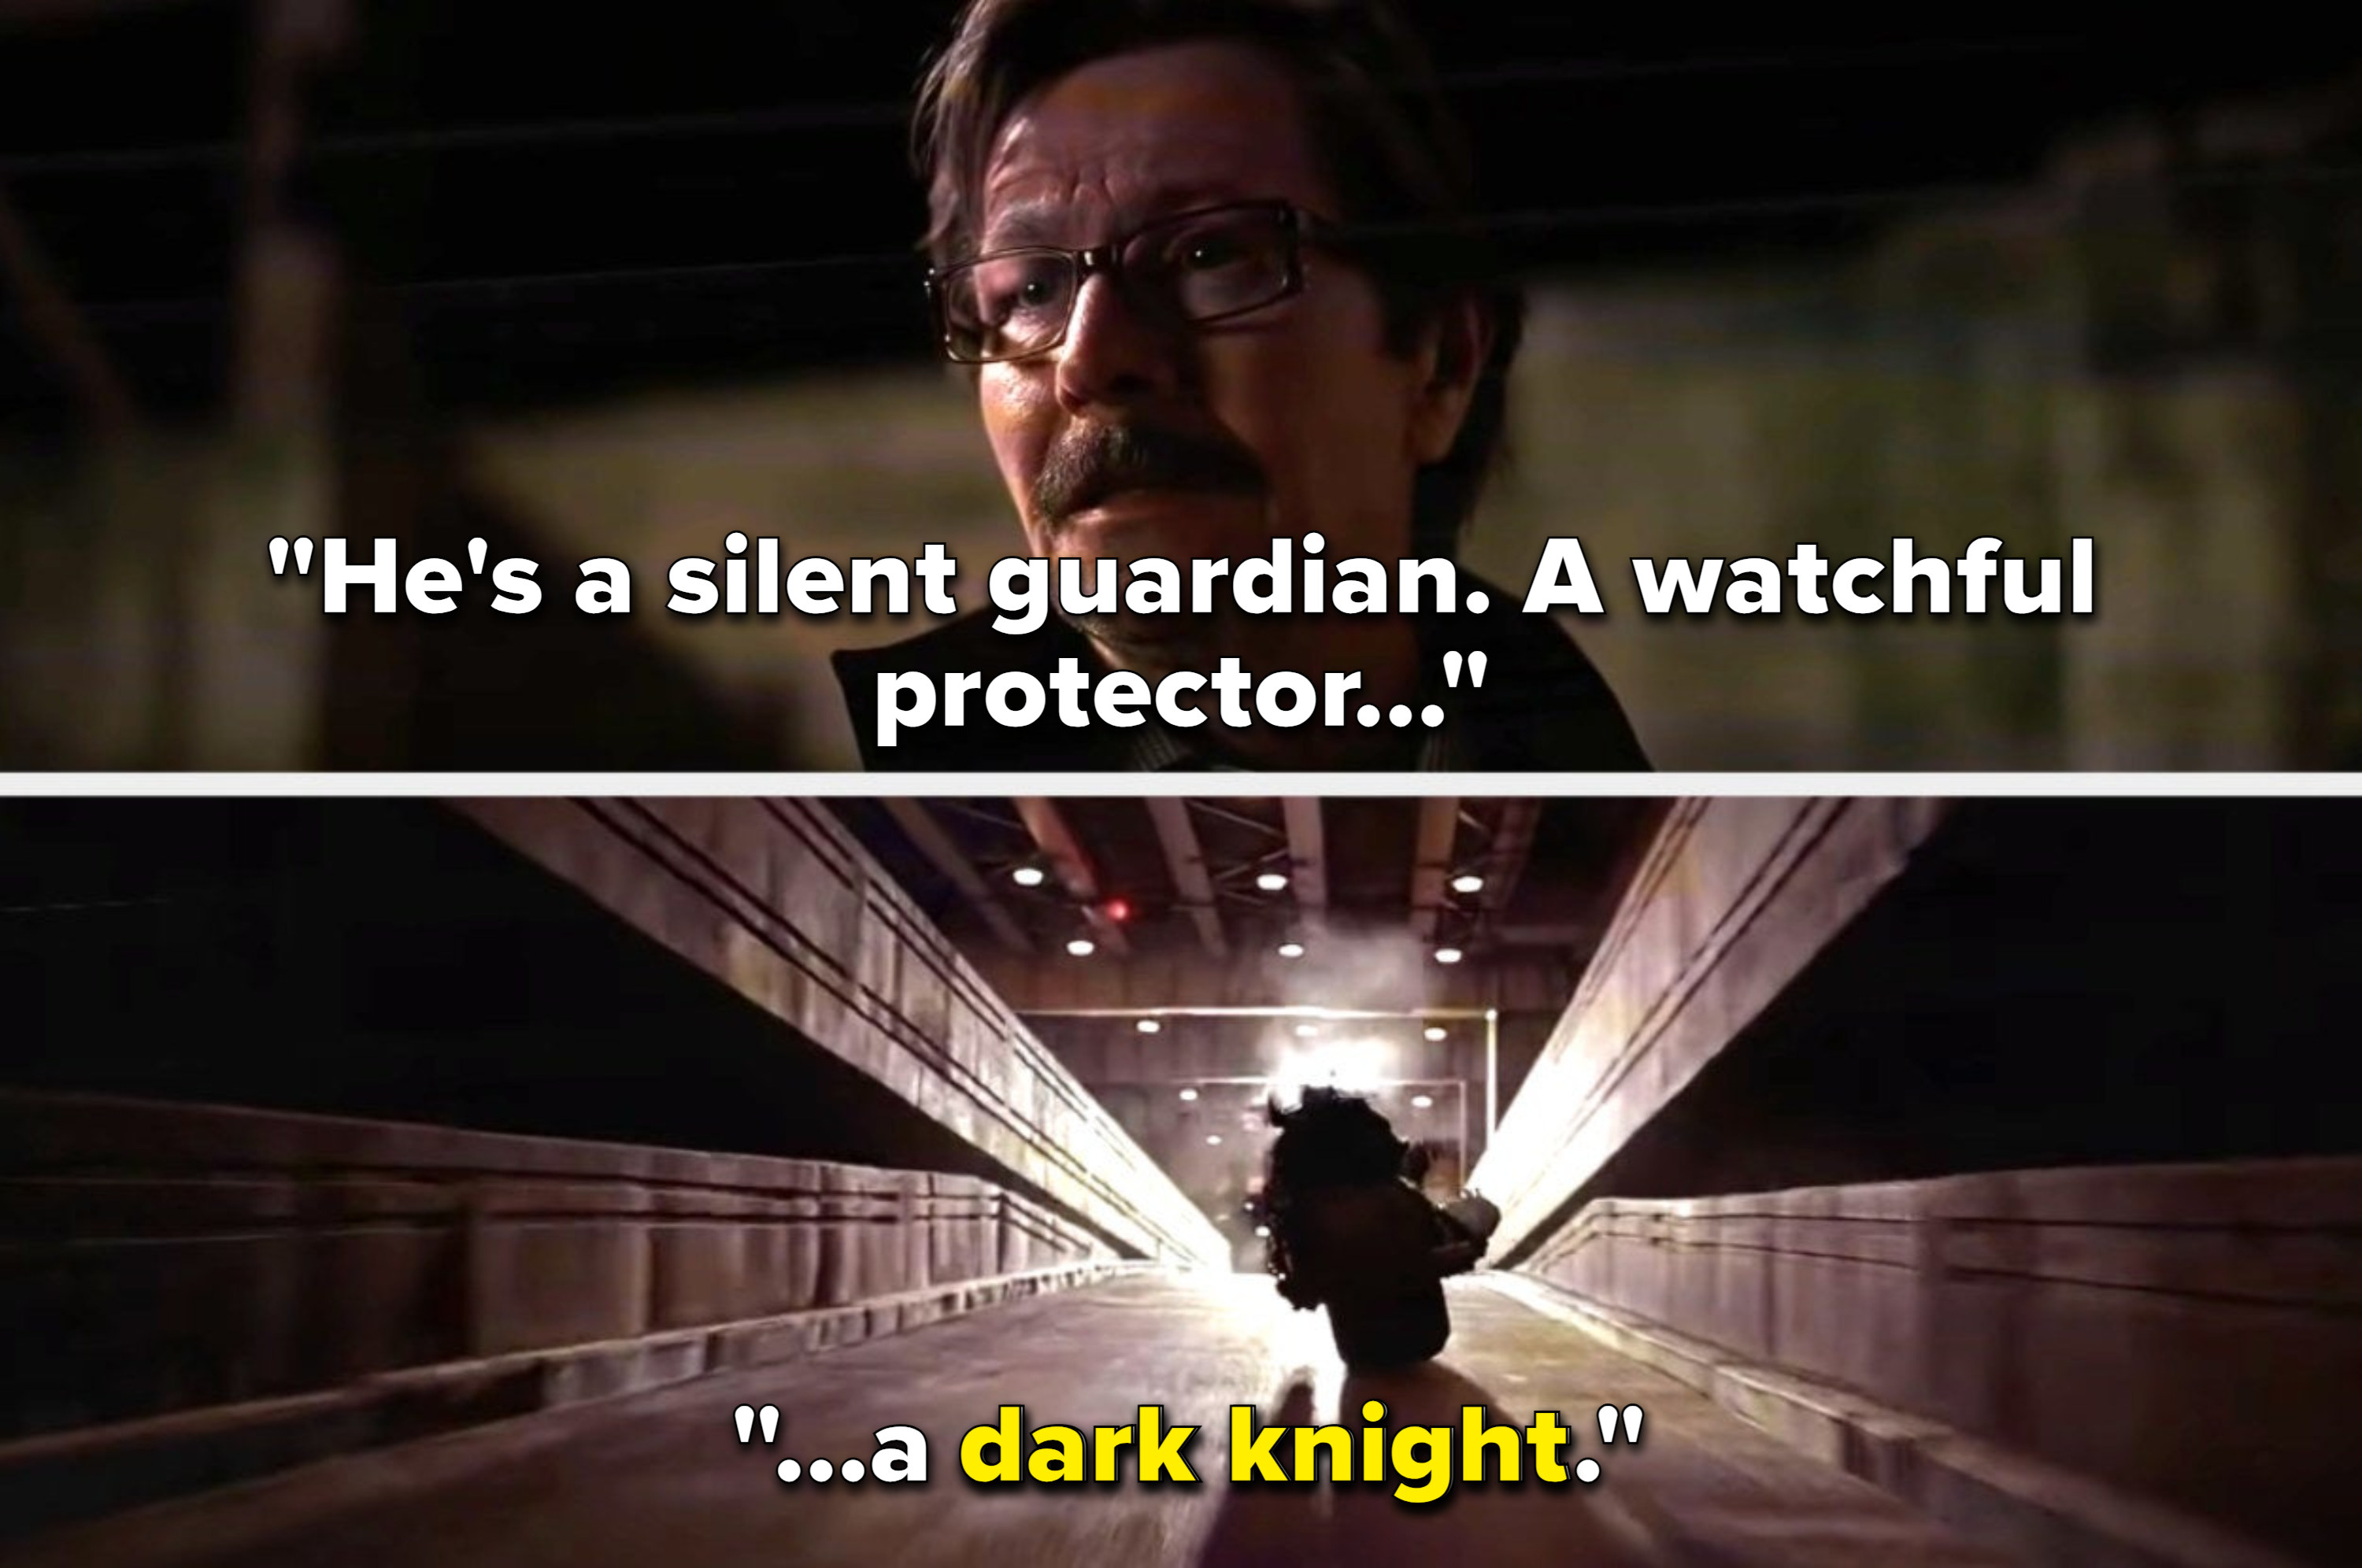 Commissioner Gordon says &quot;He&#x27;s a silent guardian, a watchful protector, a dark knight&quot;